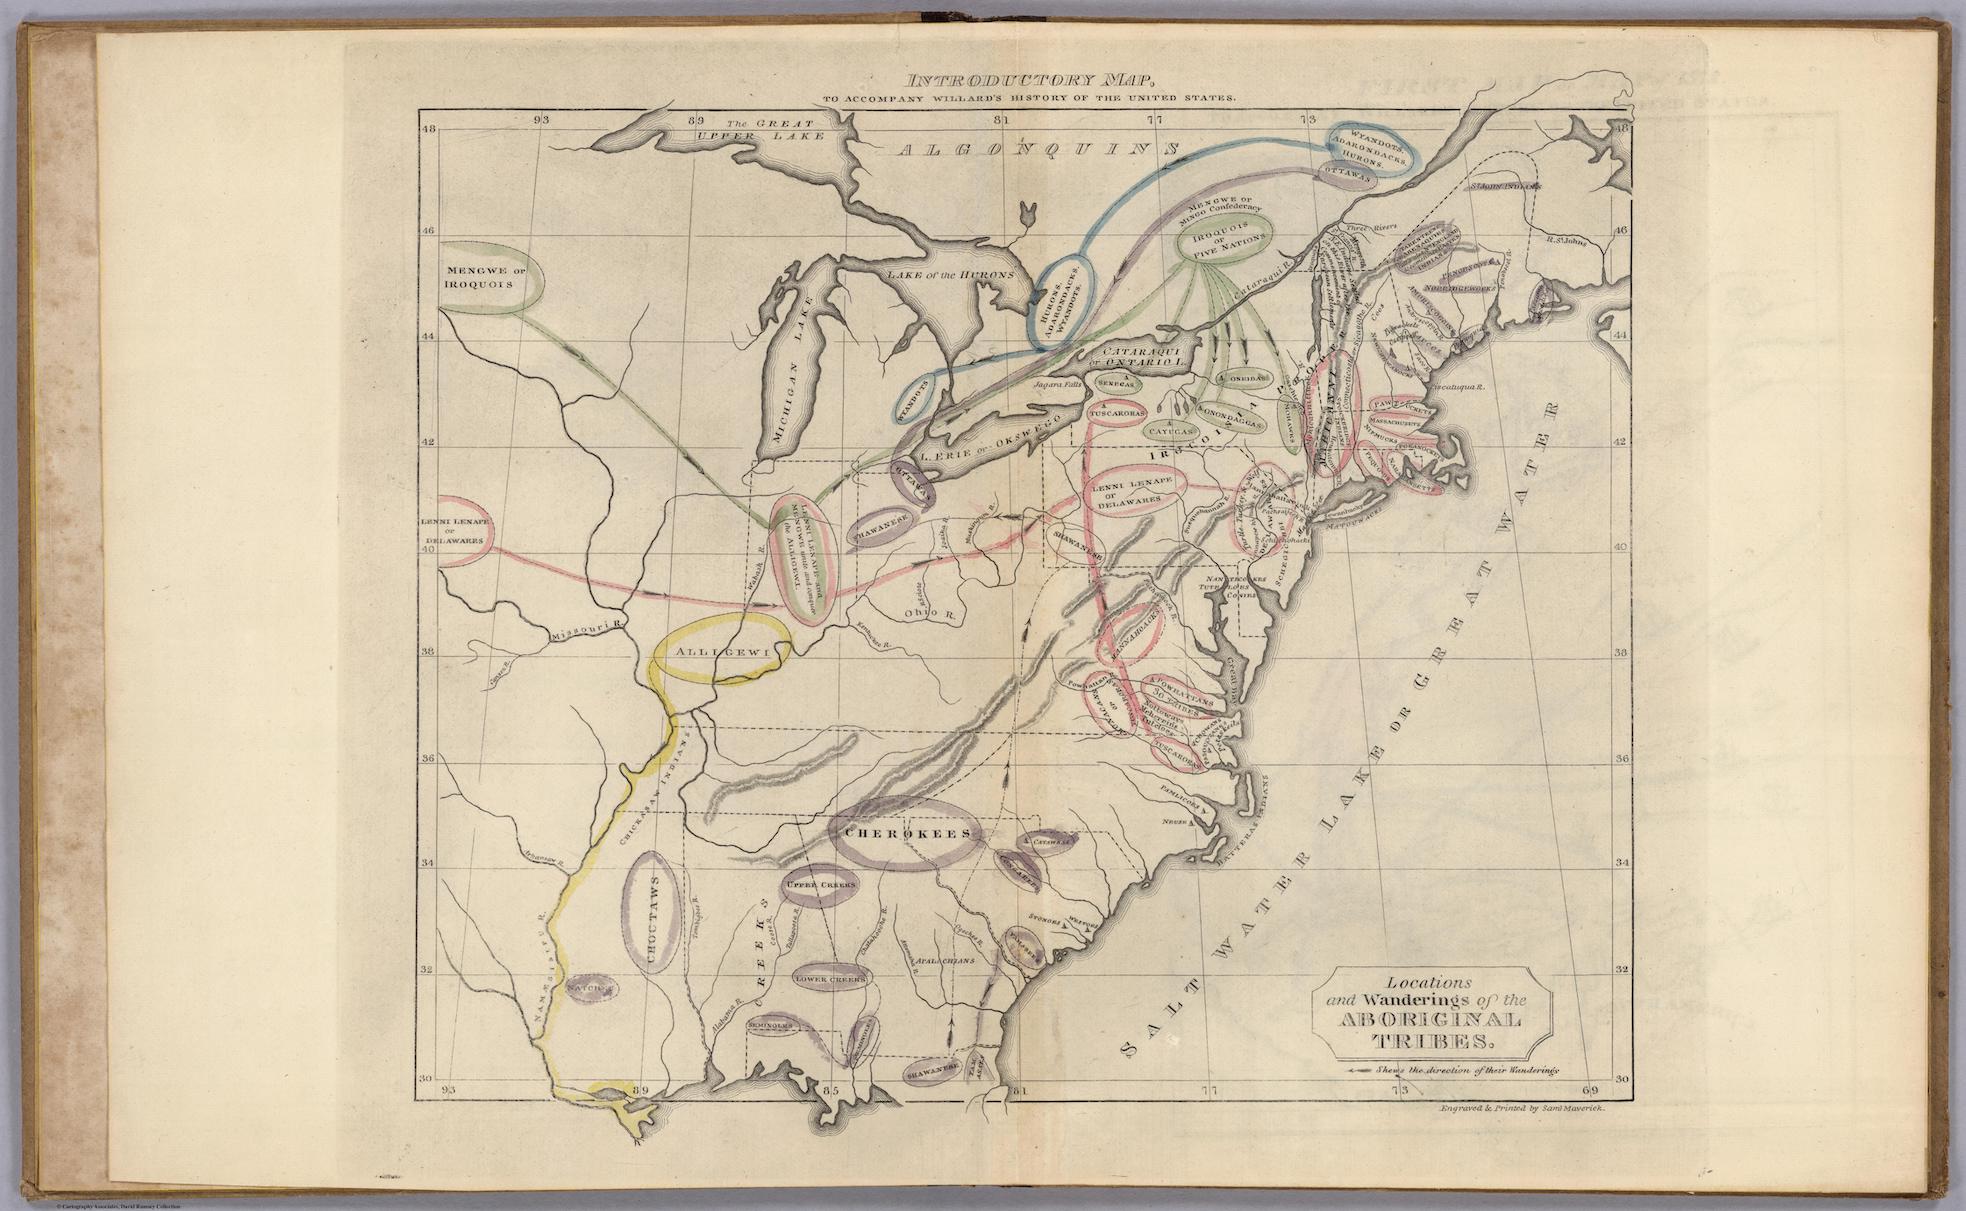 A map of the eastern half of the United States depicting the locations and movements of various indigenous tribes (or the “Wanderings of Aboriginal Tribes,” according to the map’s language). Tribe names are printed in bold, uppercase letters and circled with different colors, along with the paths of their movements. Near the five Great Lakes, there is a cluster of pink, green, and purple circles and lines, depicting a high number of peoples who lived and moved around this area. Purple, yellow, and pink lines spread out from that point and occupy land further west and south.